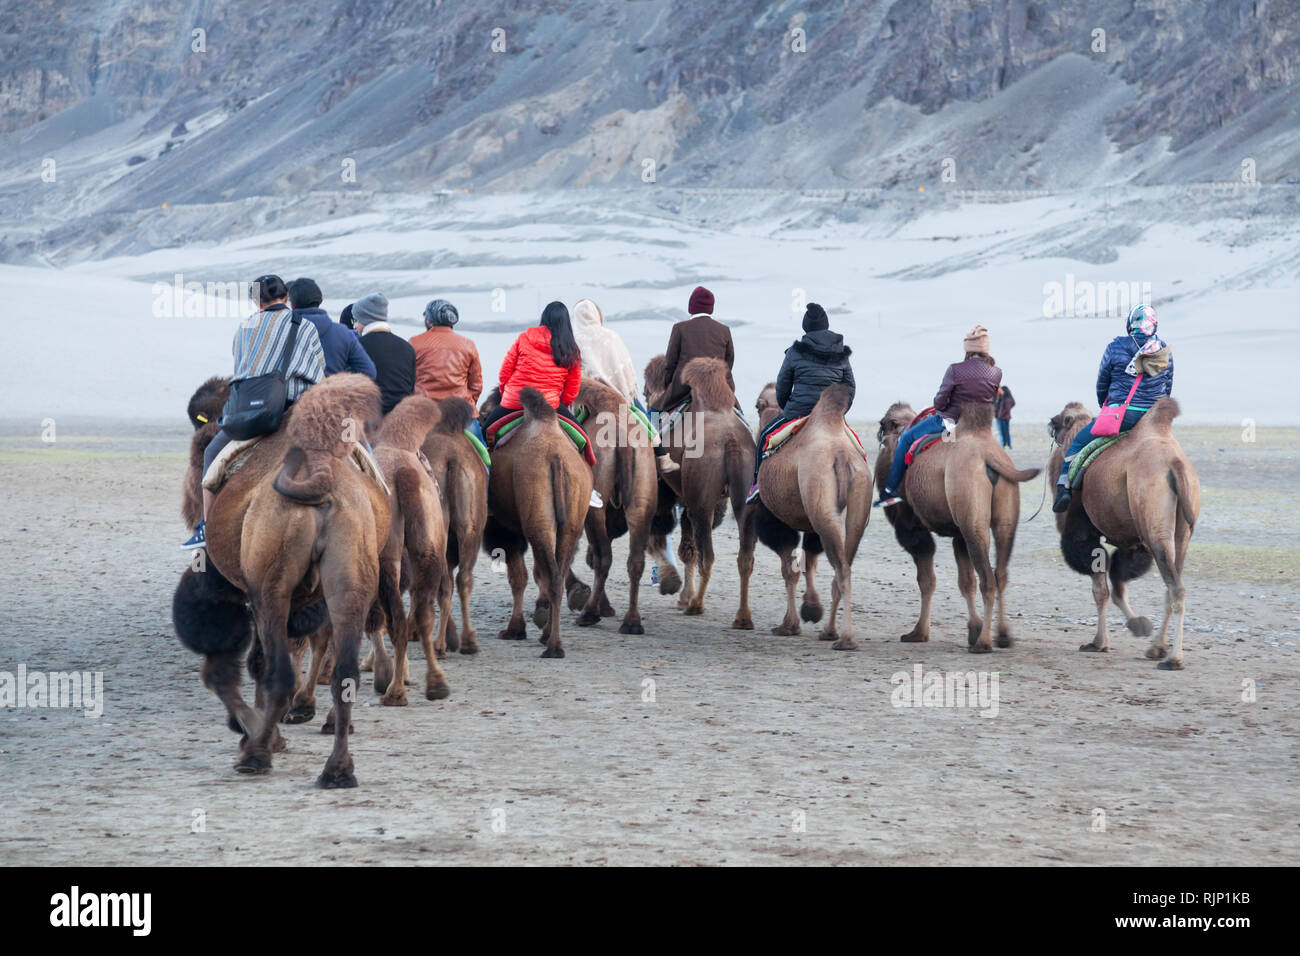 Group of tourists riding bactrian camels in the area of sand dunes near Hunder, Nubra Valley, Ladakh, Jammu and Kashmir, India Stock Photo